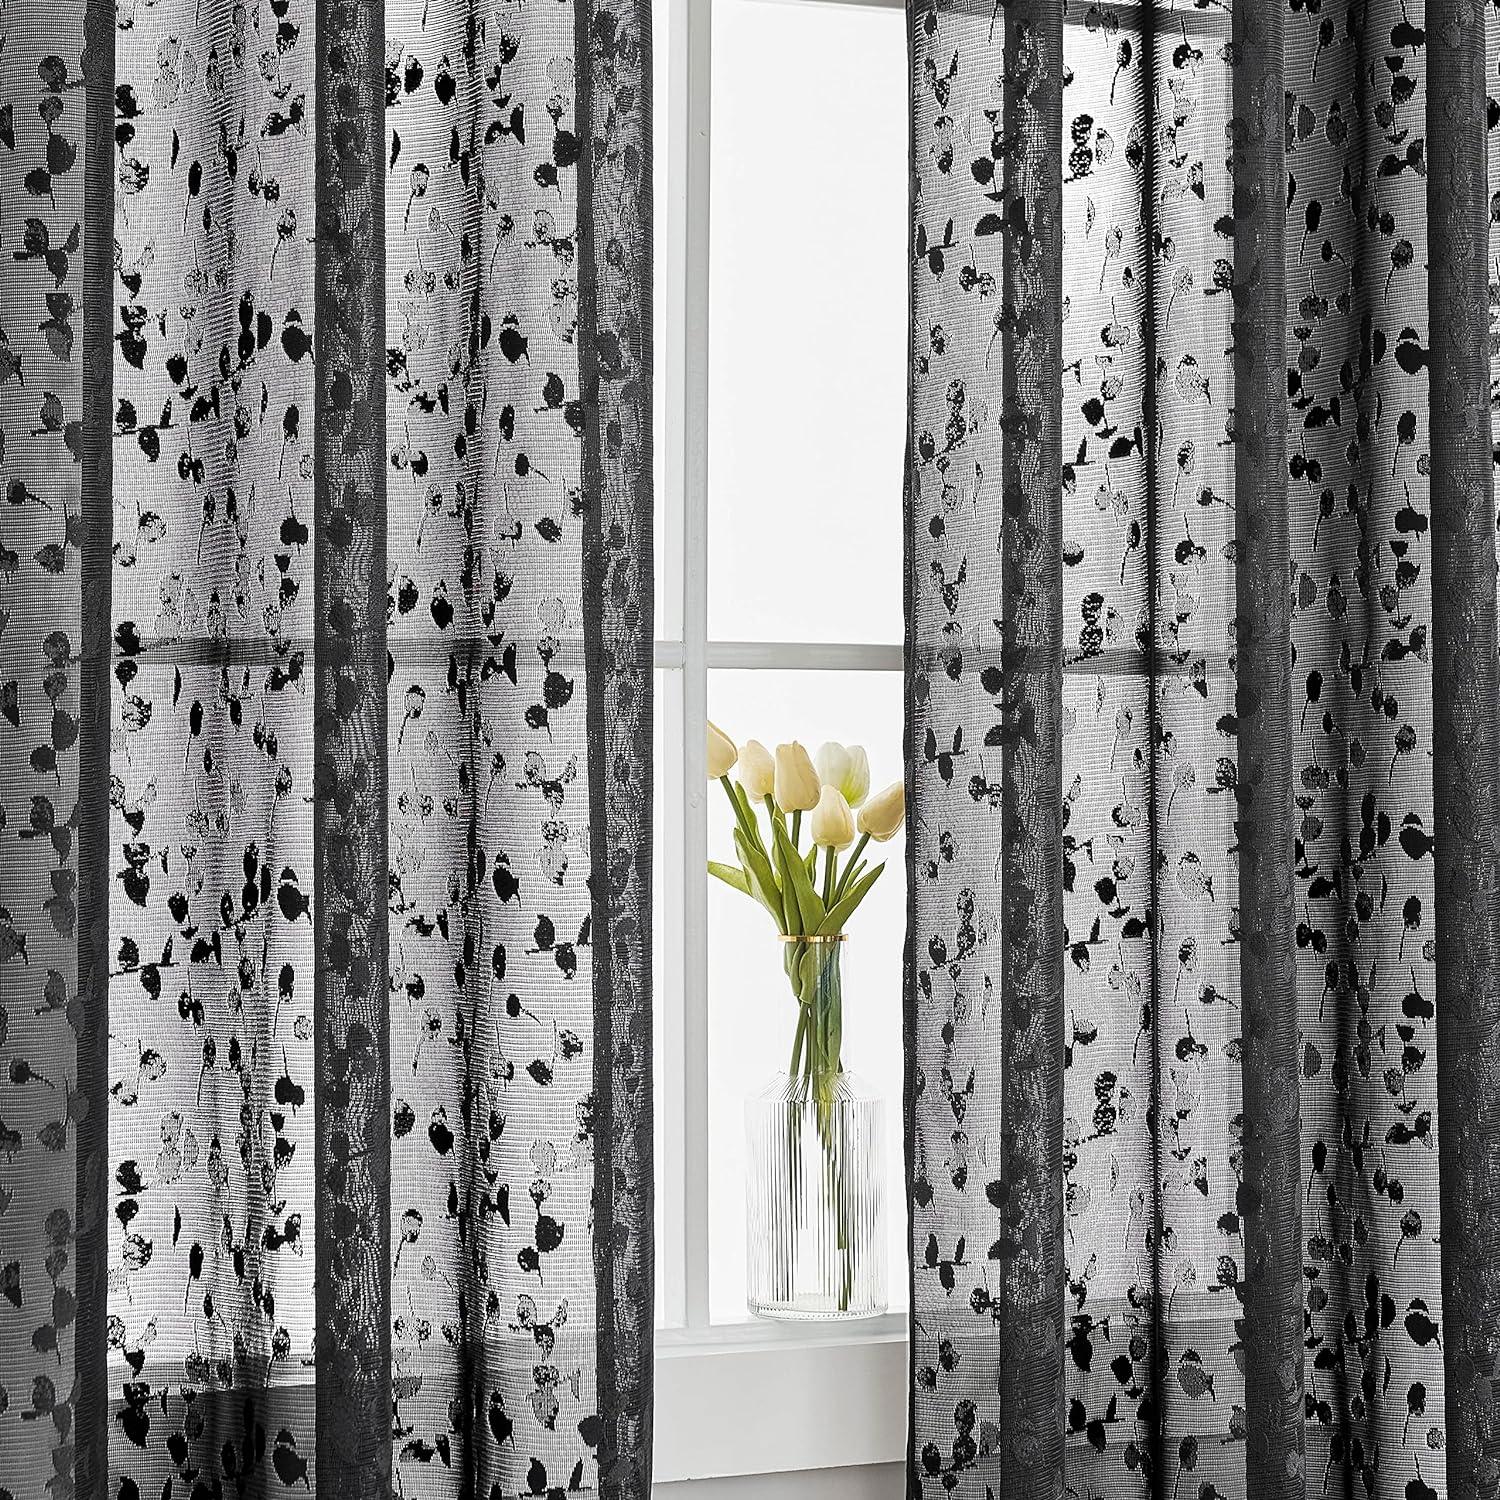 Lace Sheer Curtains Black for Bedroom 52W x 90L inch 2pcs - Massive Discounts